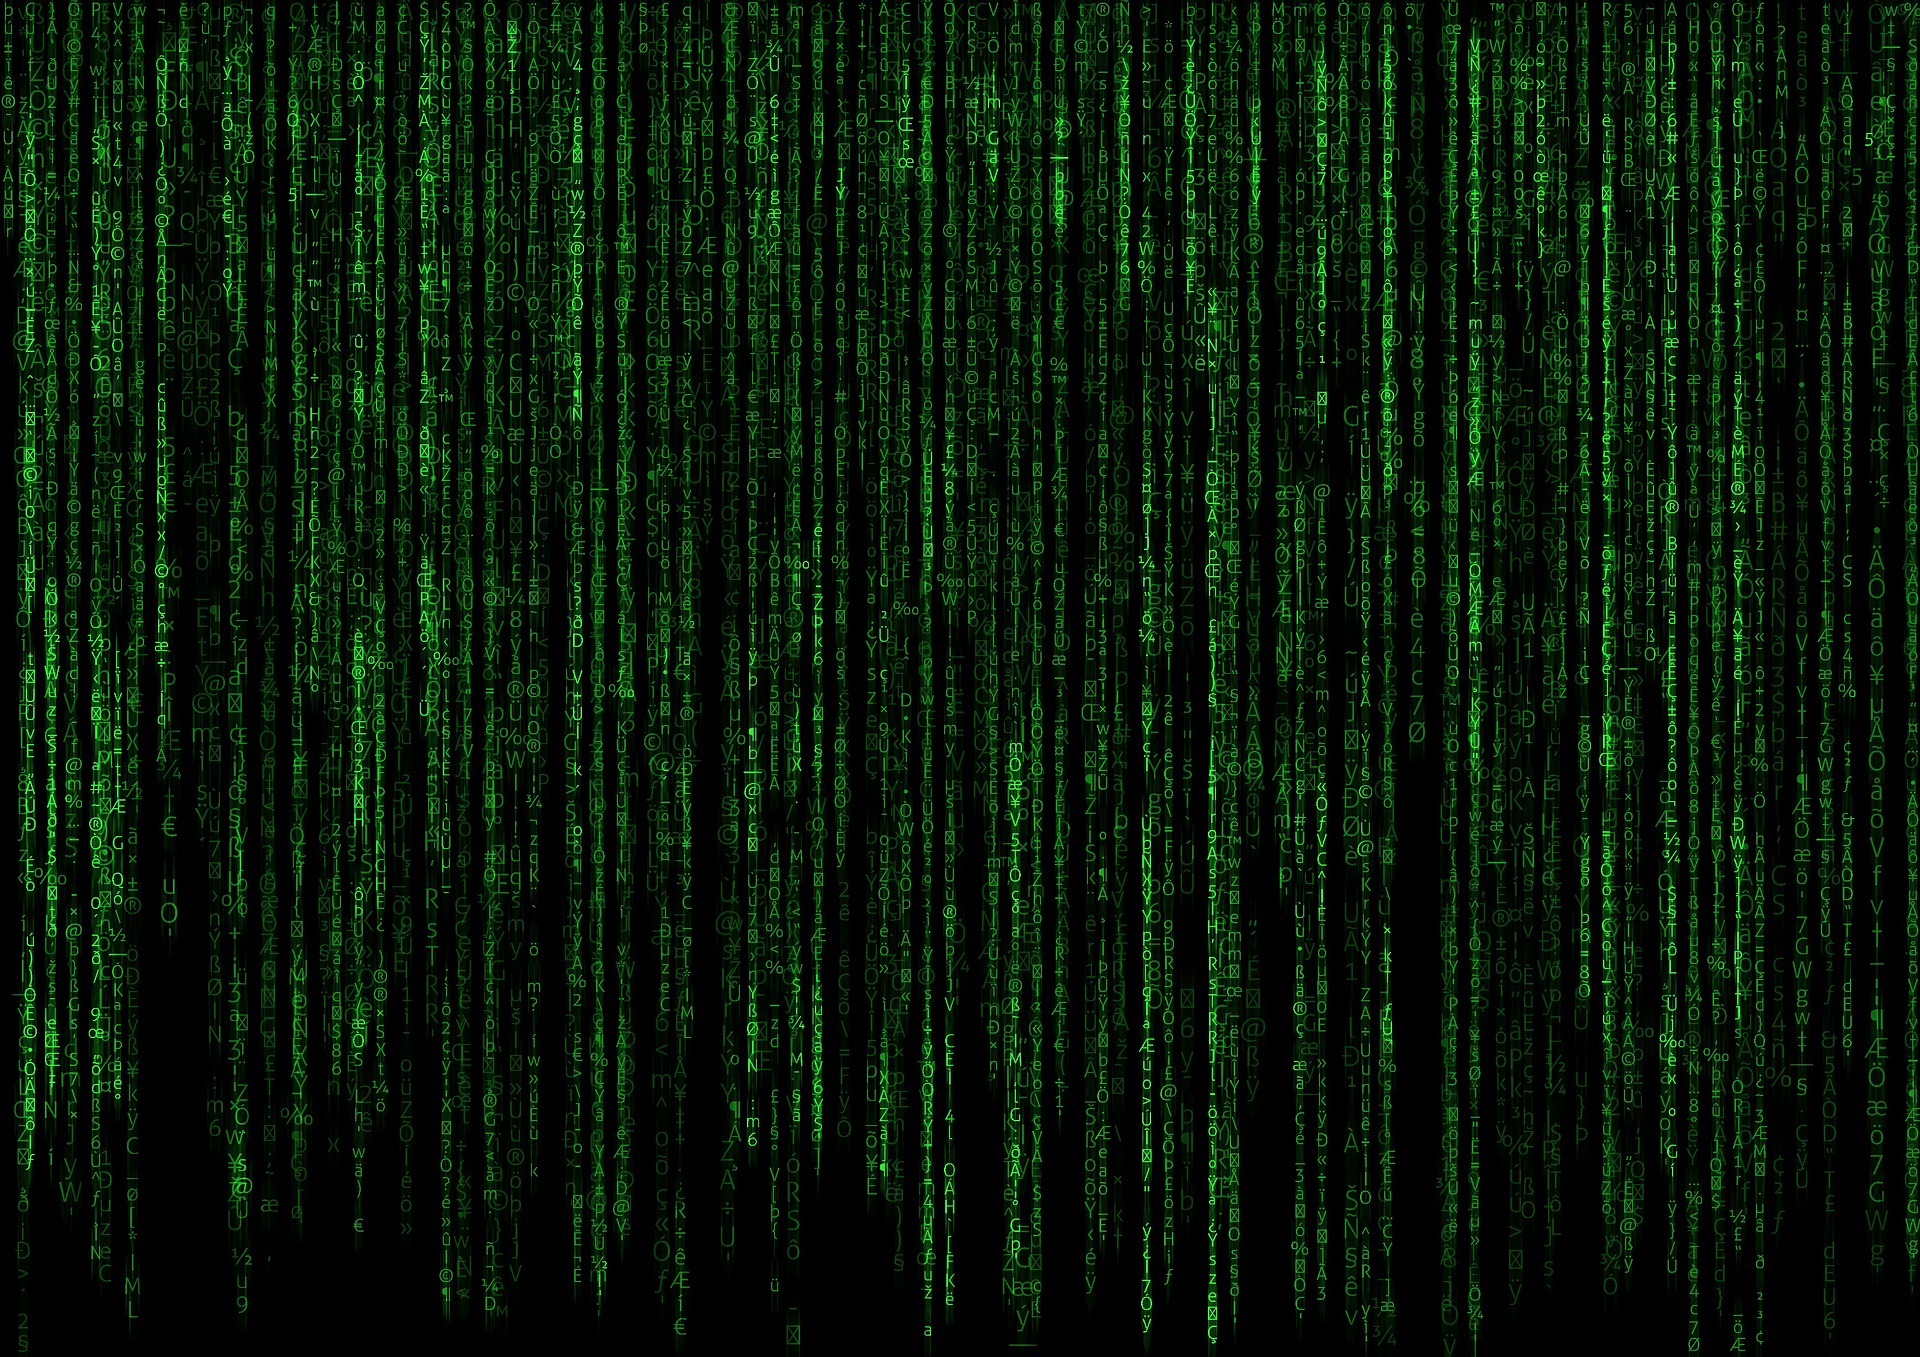 Code from the film the Matrix